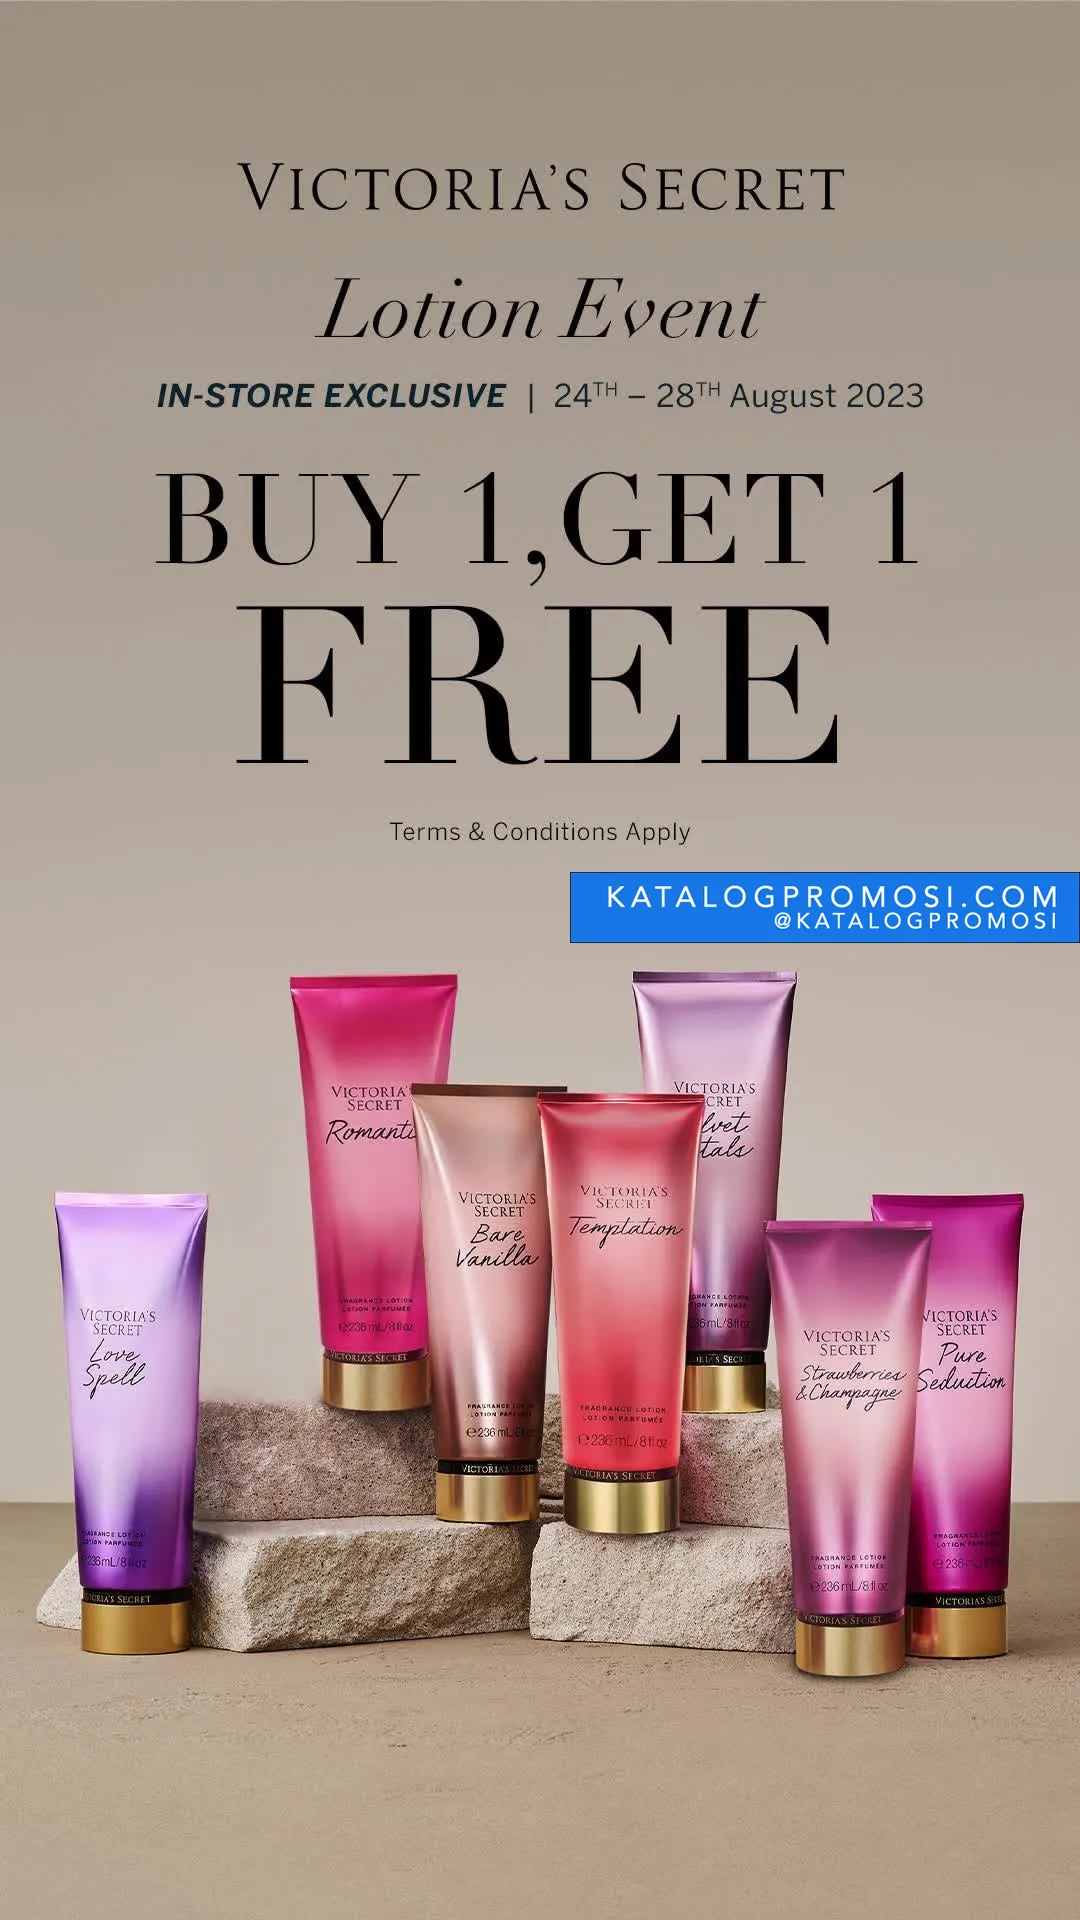 Promo Victoria’s Secret Buy 1 Get 1 Free on bestselling lotions!